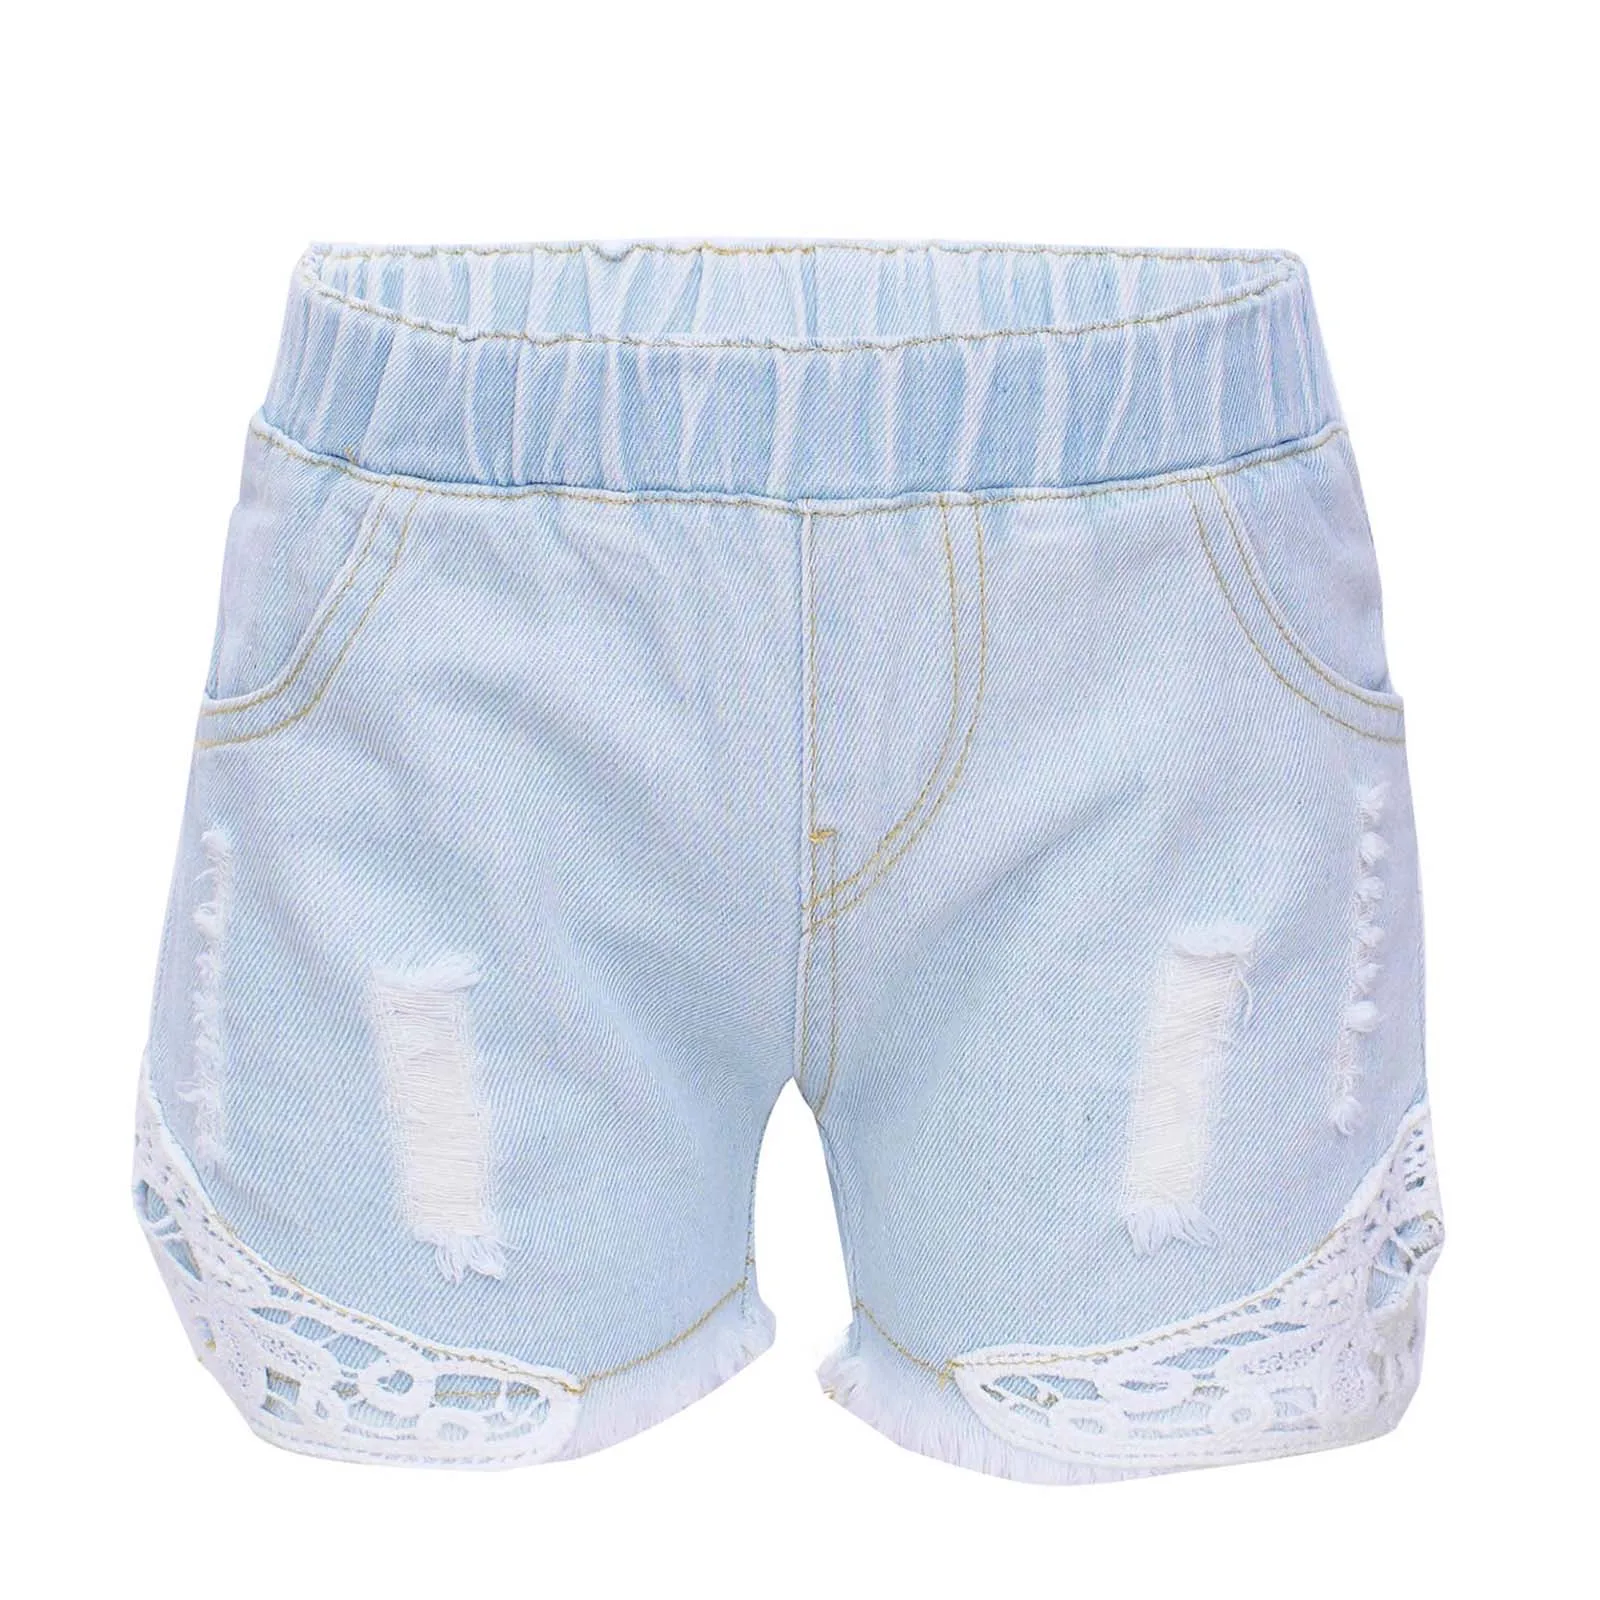 

Kids Shorts for Girls Denim Shorts Children Summer Ripped Lace Hem Short Pants Fashion Jeans 2022 Casual Shorts For Teenager